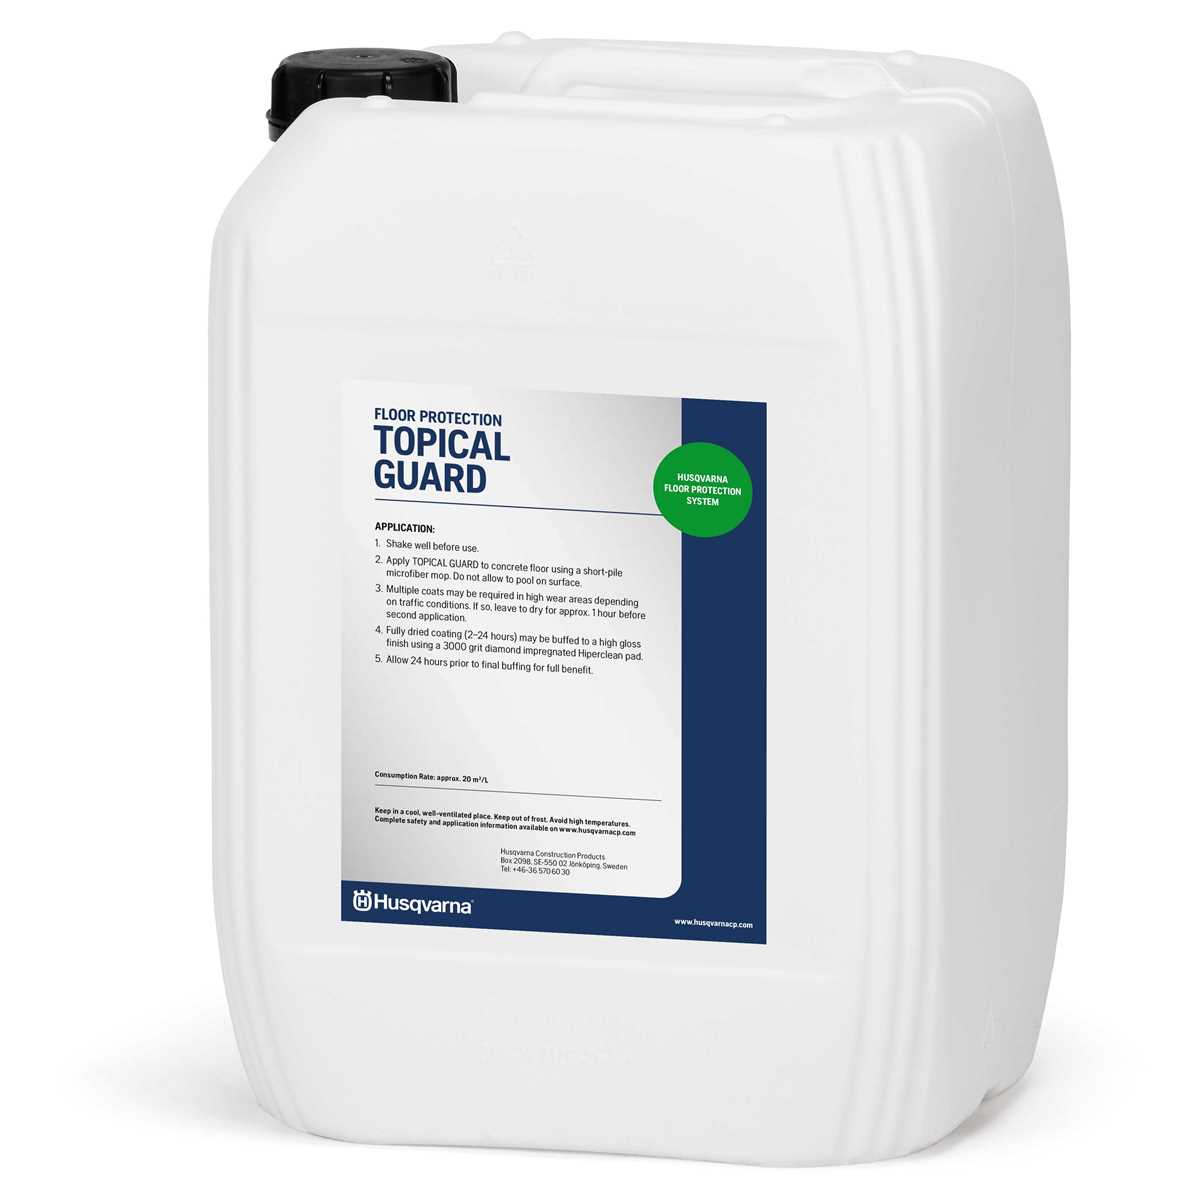 TOPICAL GUARD is a water based a film-forming sealer that improves the surface sheen and stain resistance of conventional concrete, hardened concrete or cement terrazzo floors. 